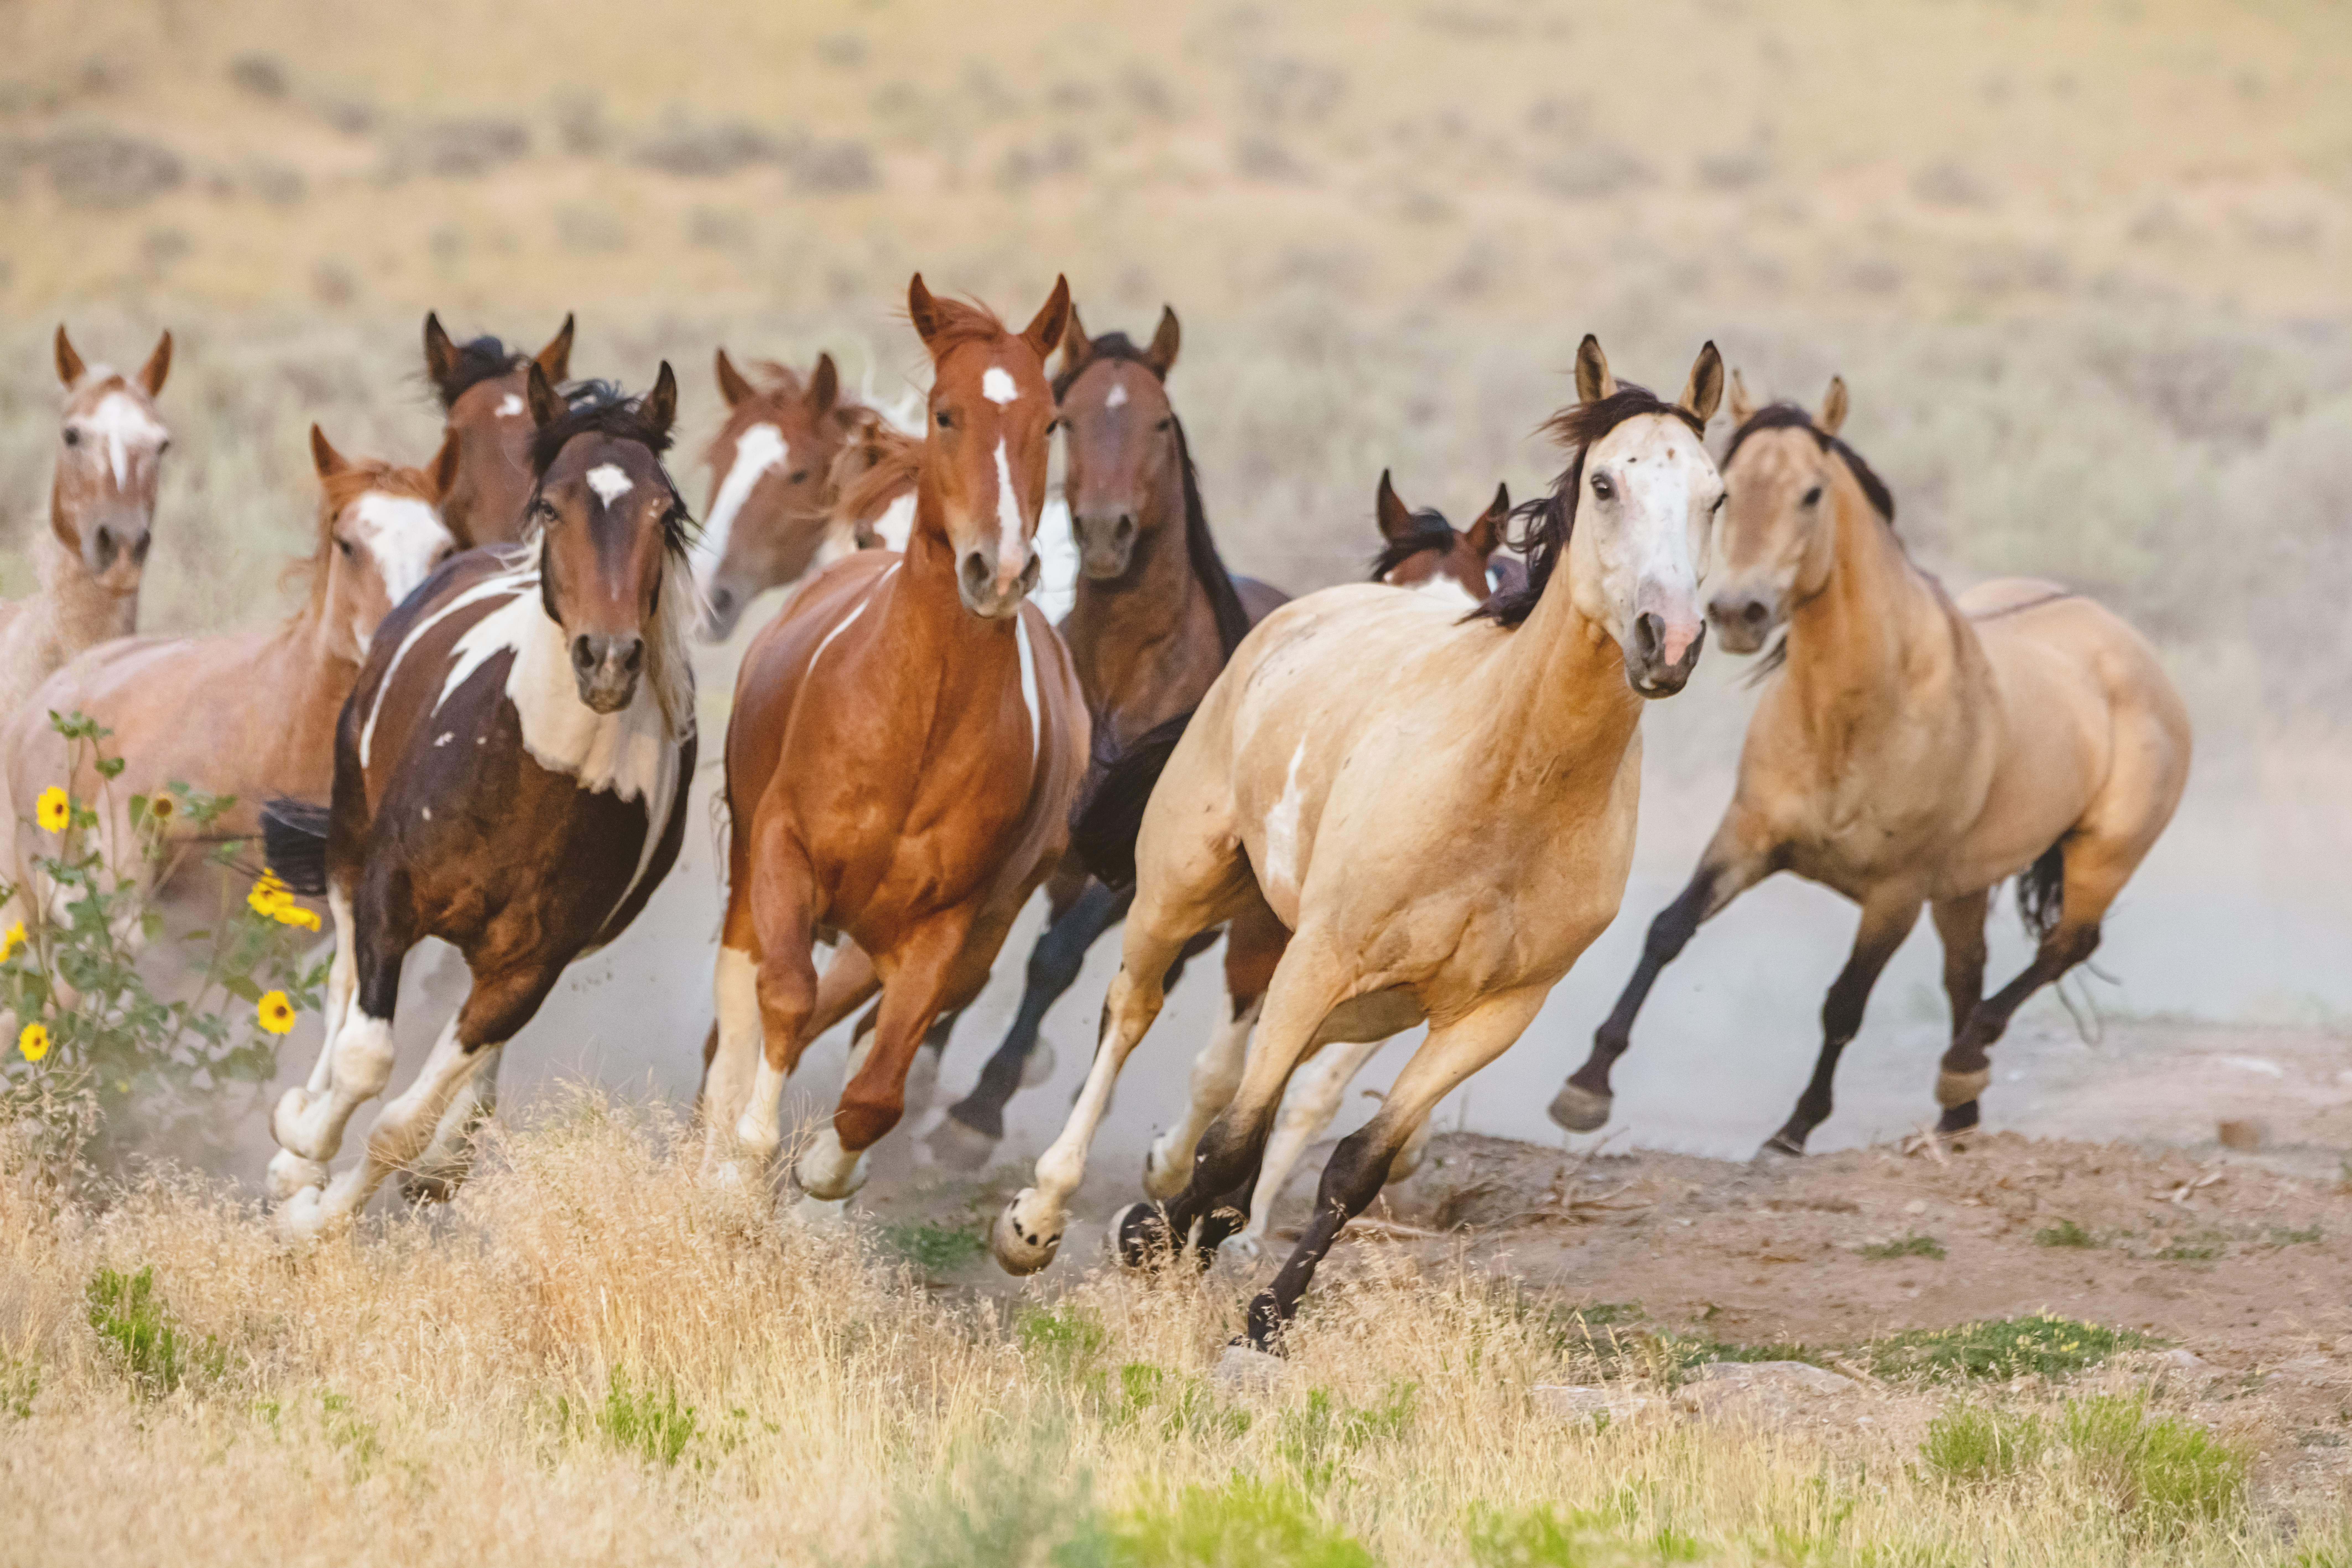 U S Forest Service Removing 1 000 Wild Horses In California Some Could Be Sold For Slaughter A Humane World